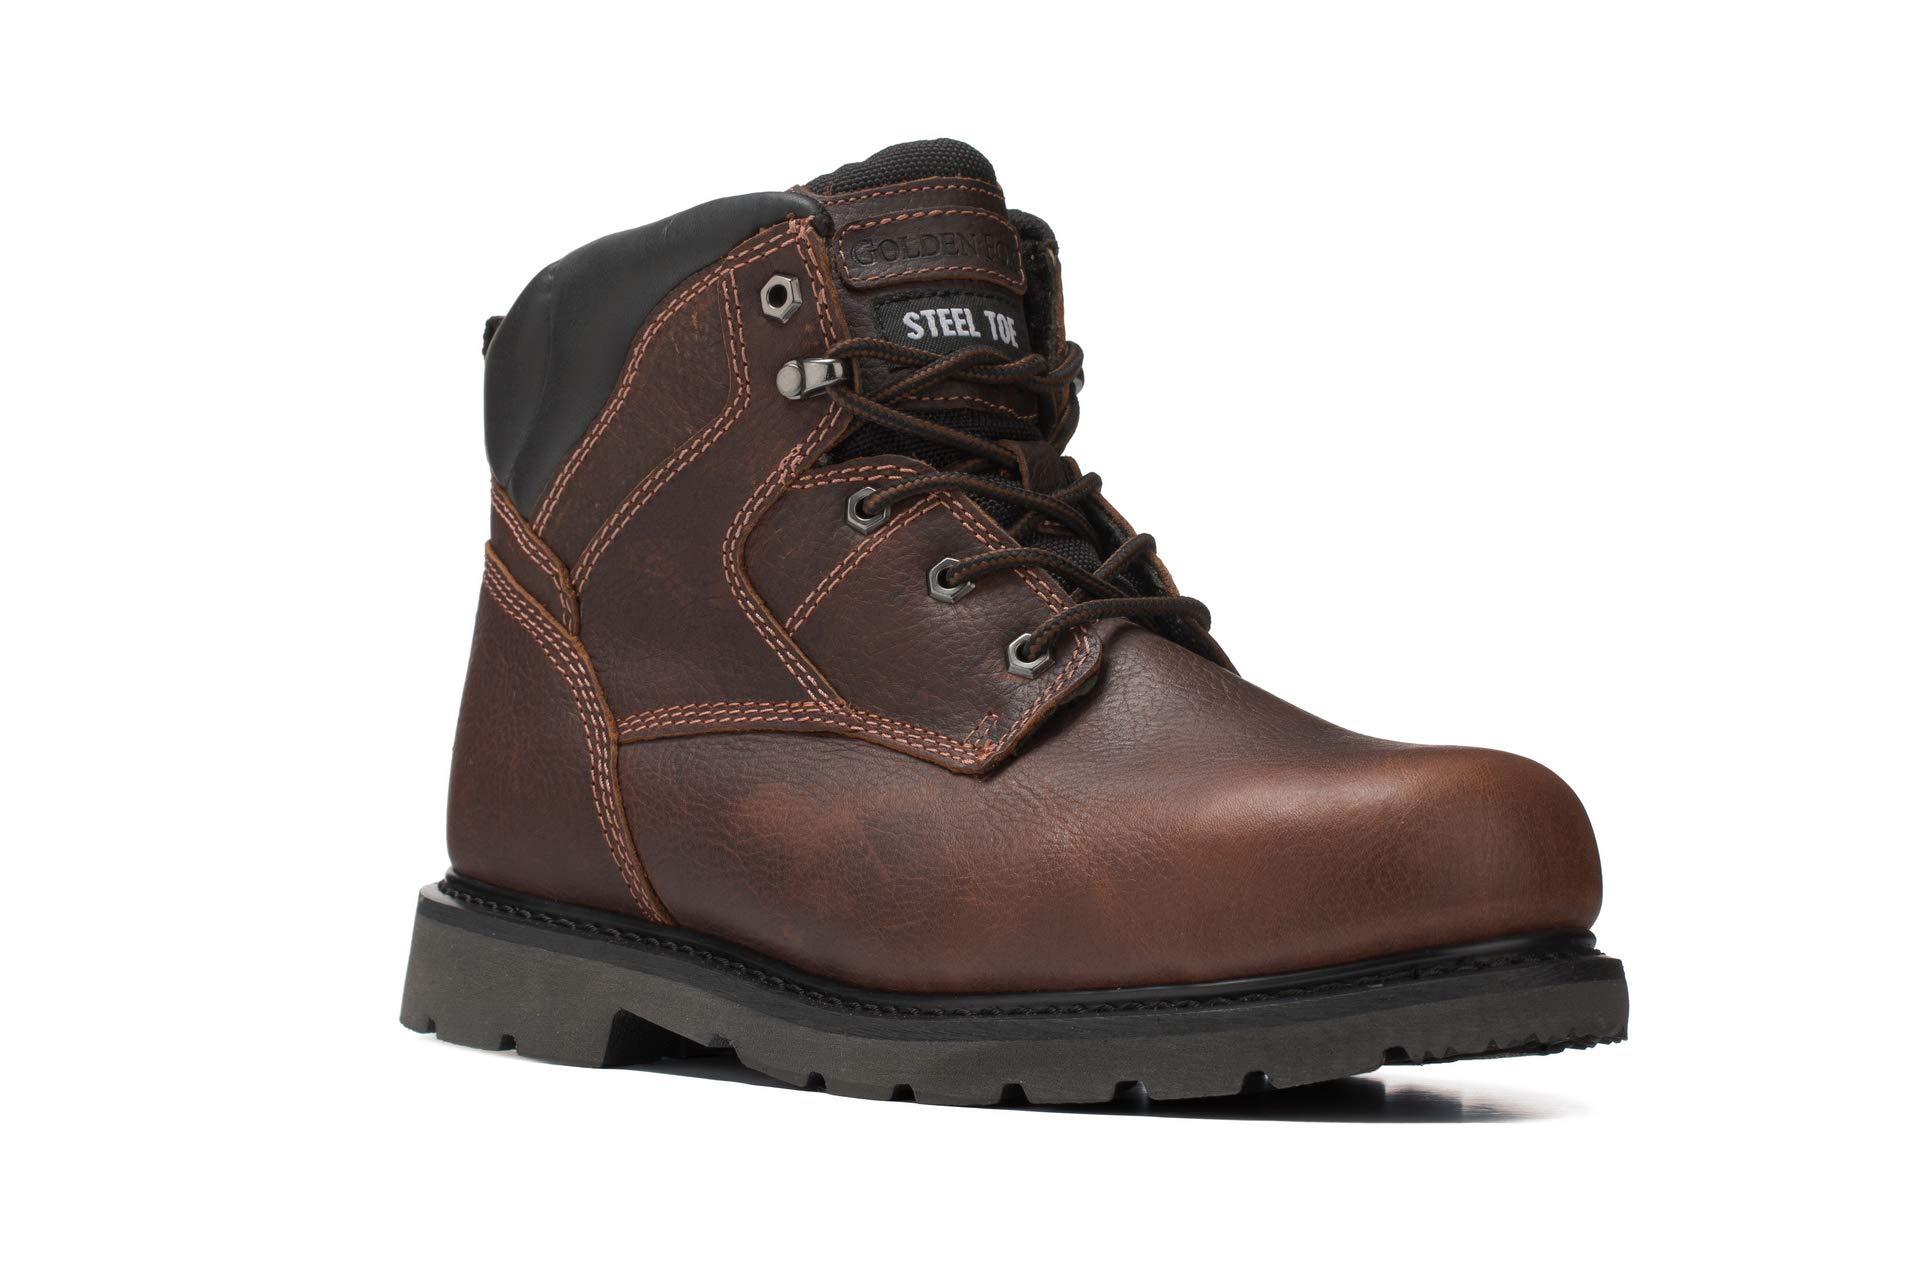 Golden Fox 4017T 6 Mens Comfortable Steel Toe Industrial Construction Safety Work Boots Size 10.5 DM Brown並行輸入